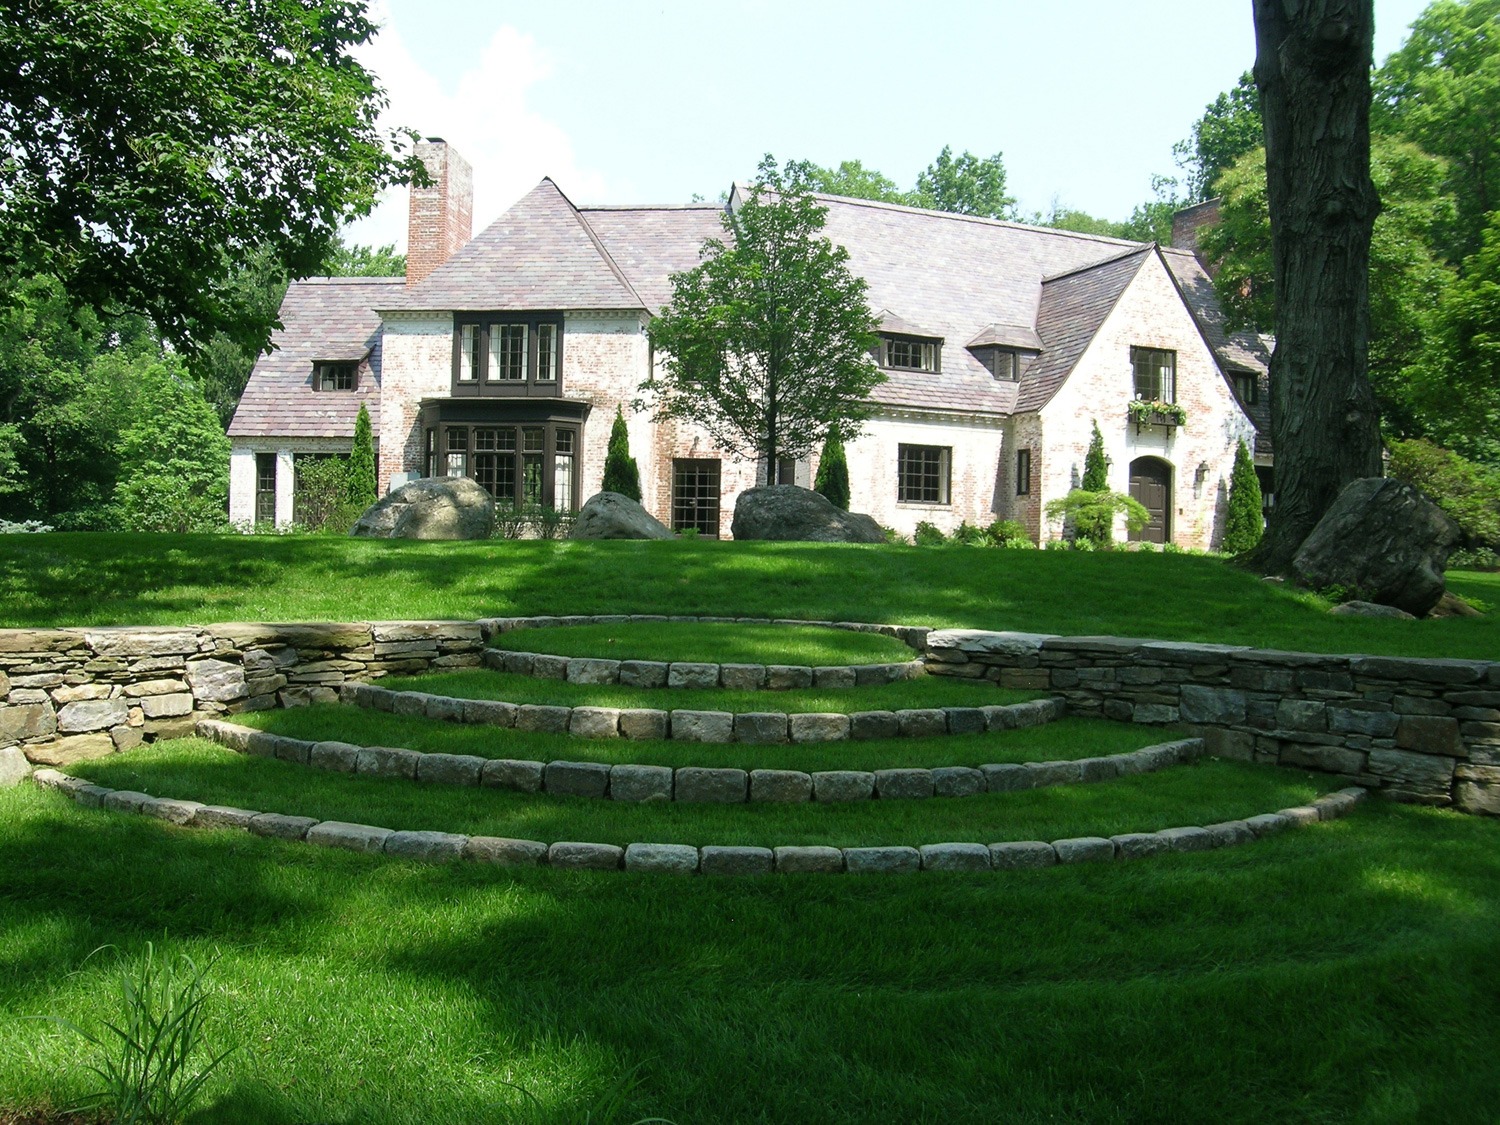 A large stone house with a slate roof, surrounded by lush greenery, featuring stone steps leading up to a well-manicured lawn and trees.